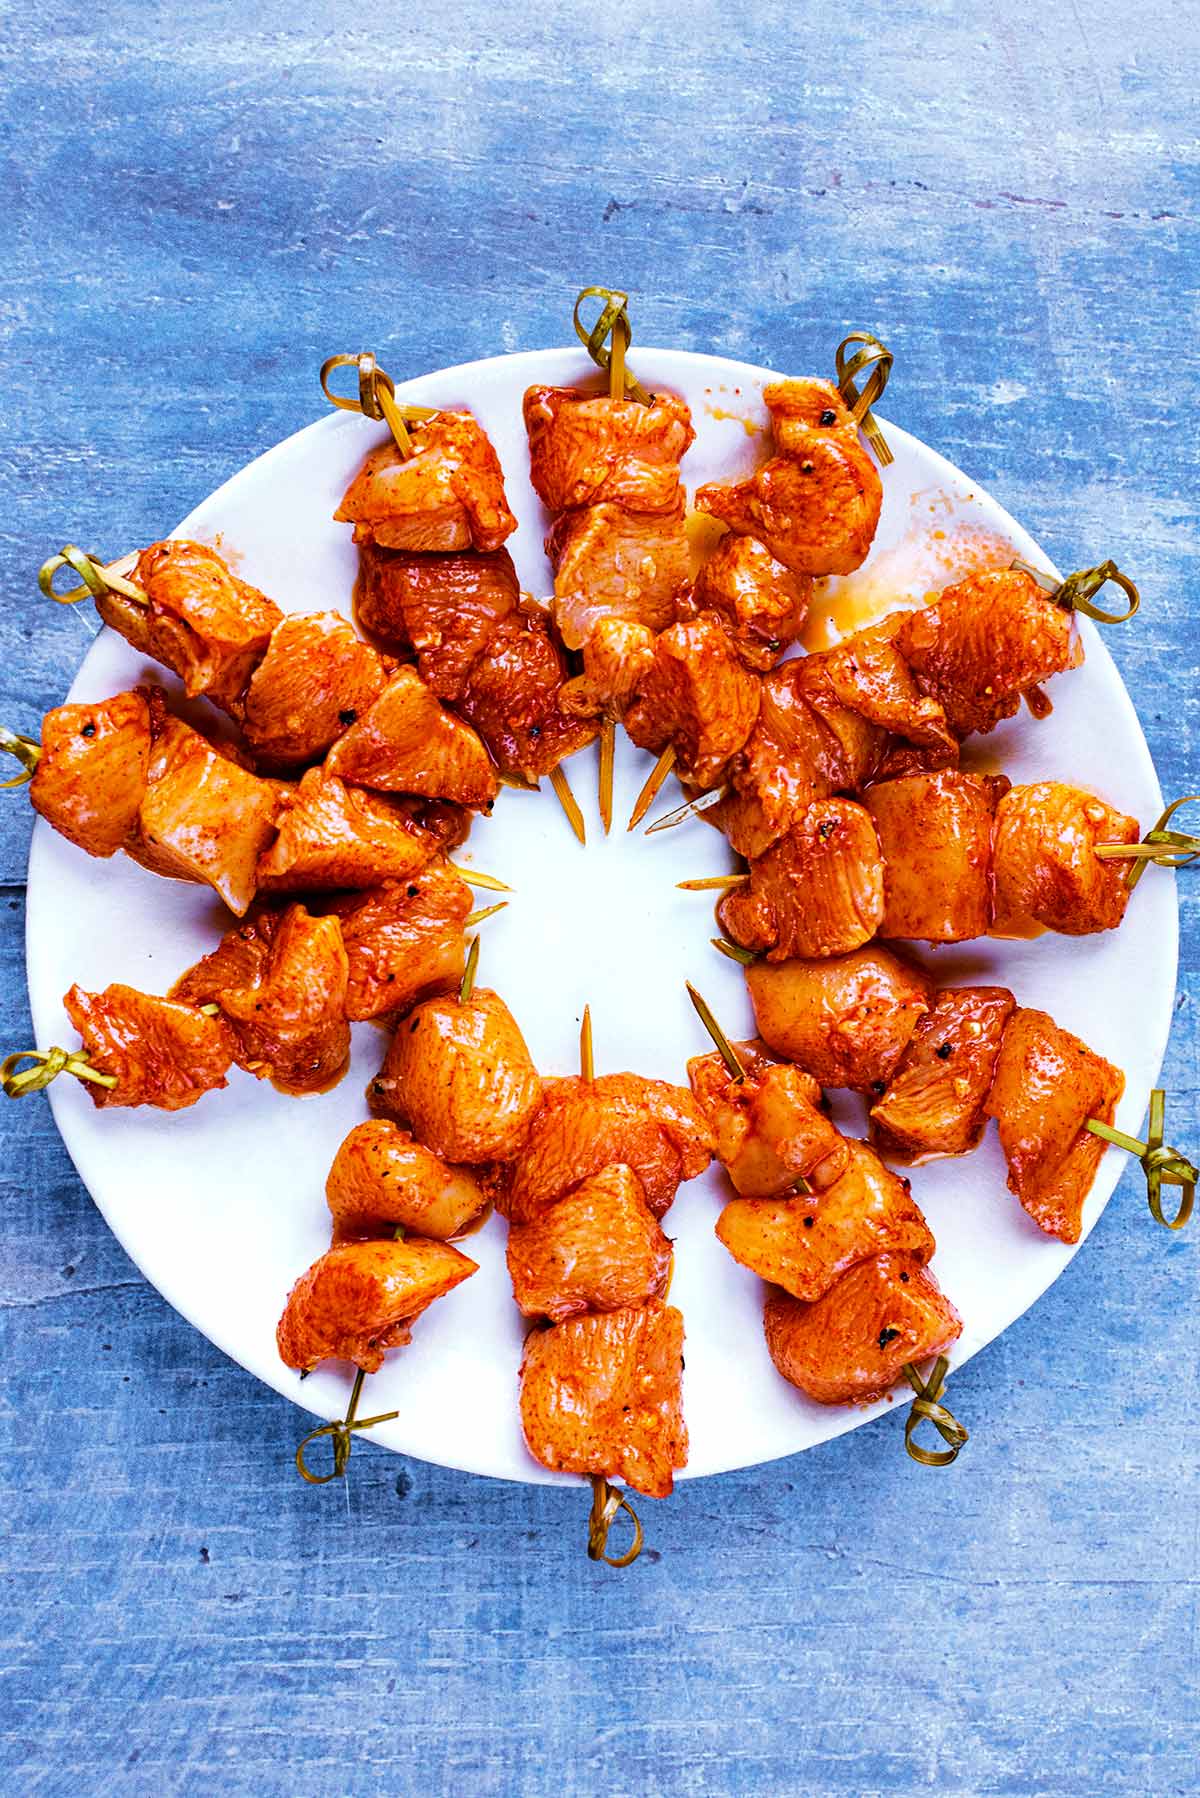 12 uncooked chicken skewers arranged in a circle on a white plate.